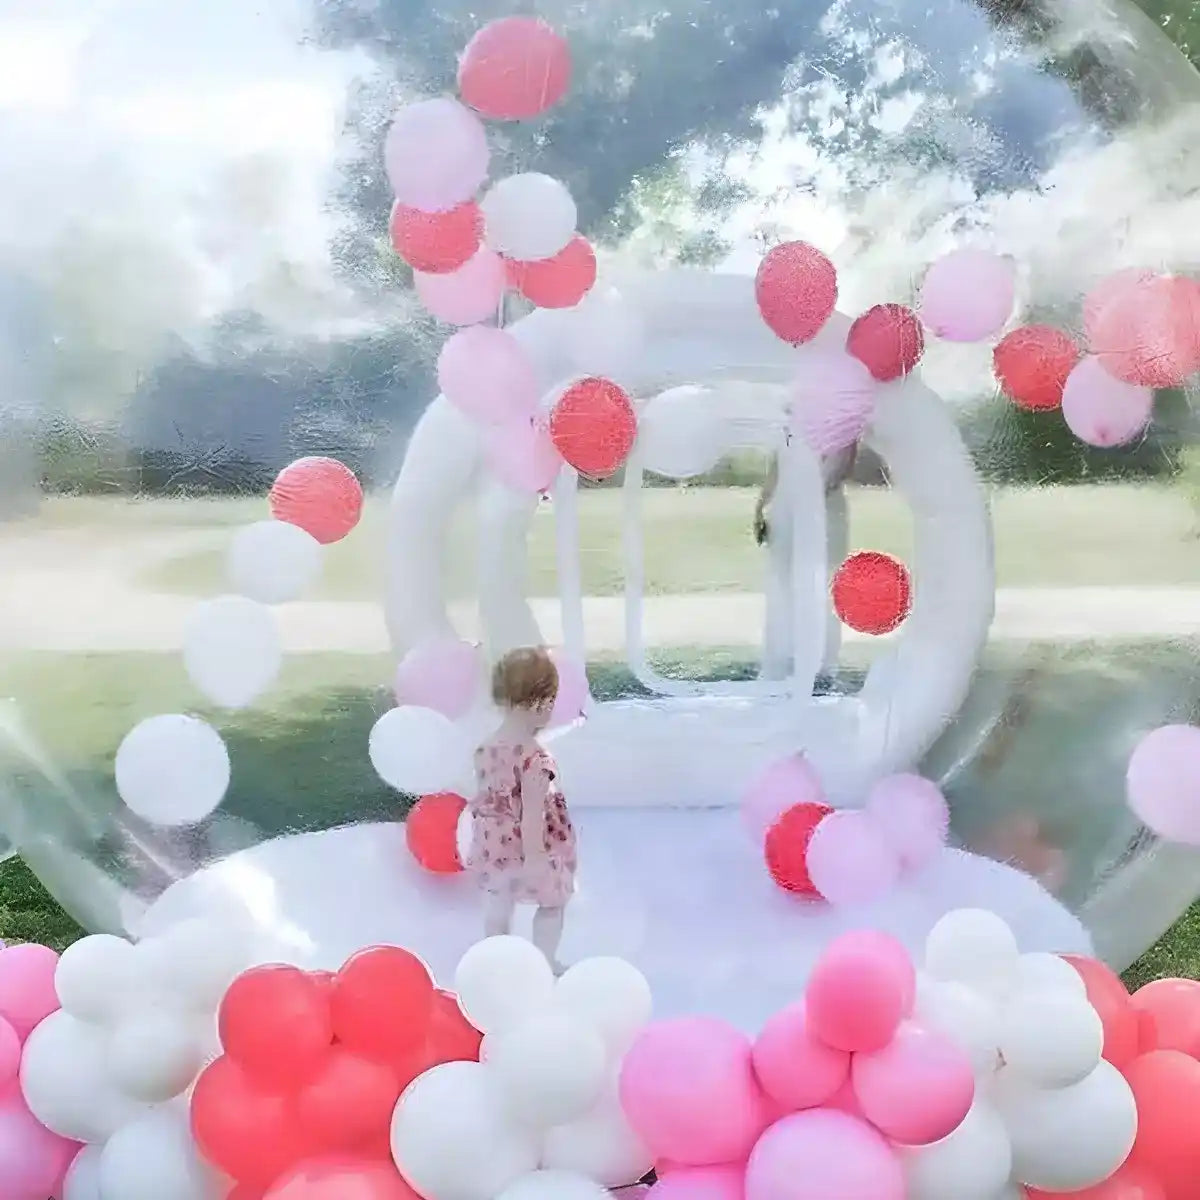 View into the transparent magic bubble house where kid play with magic balloons inside